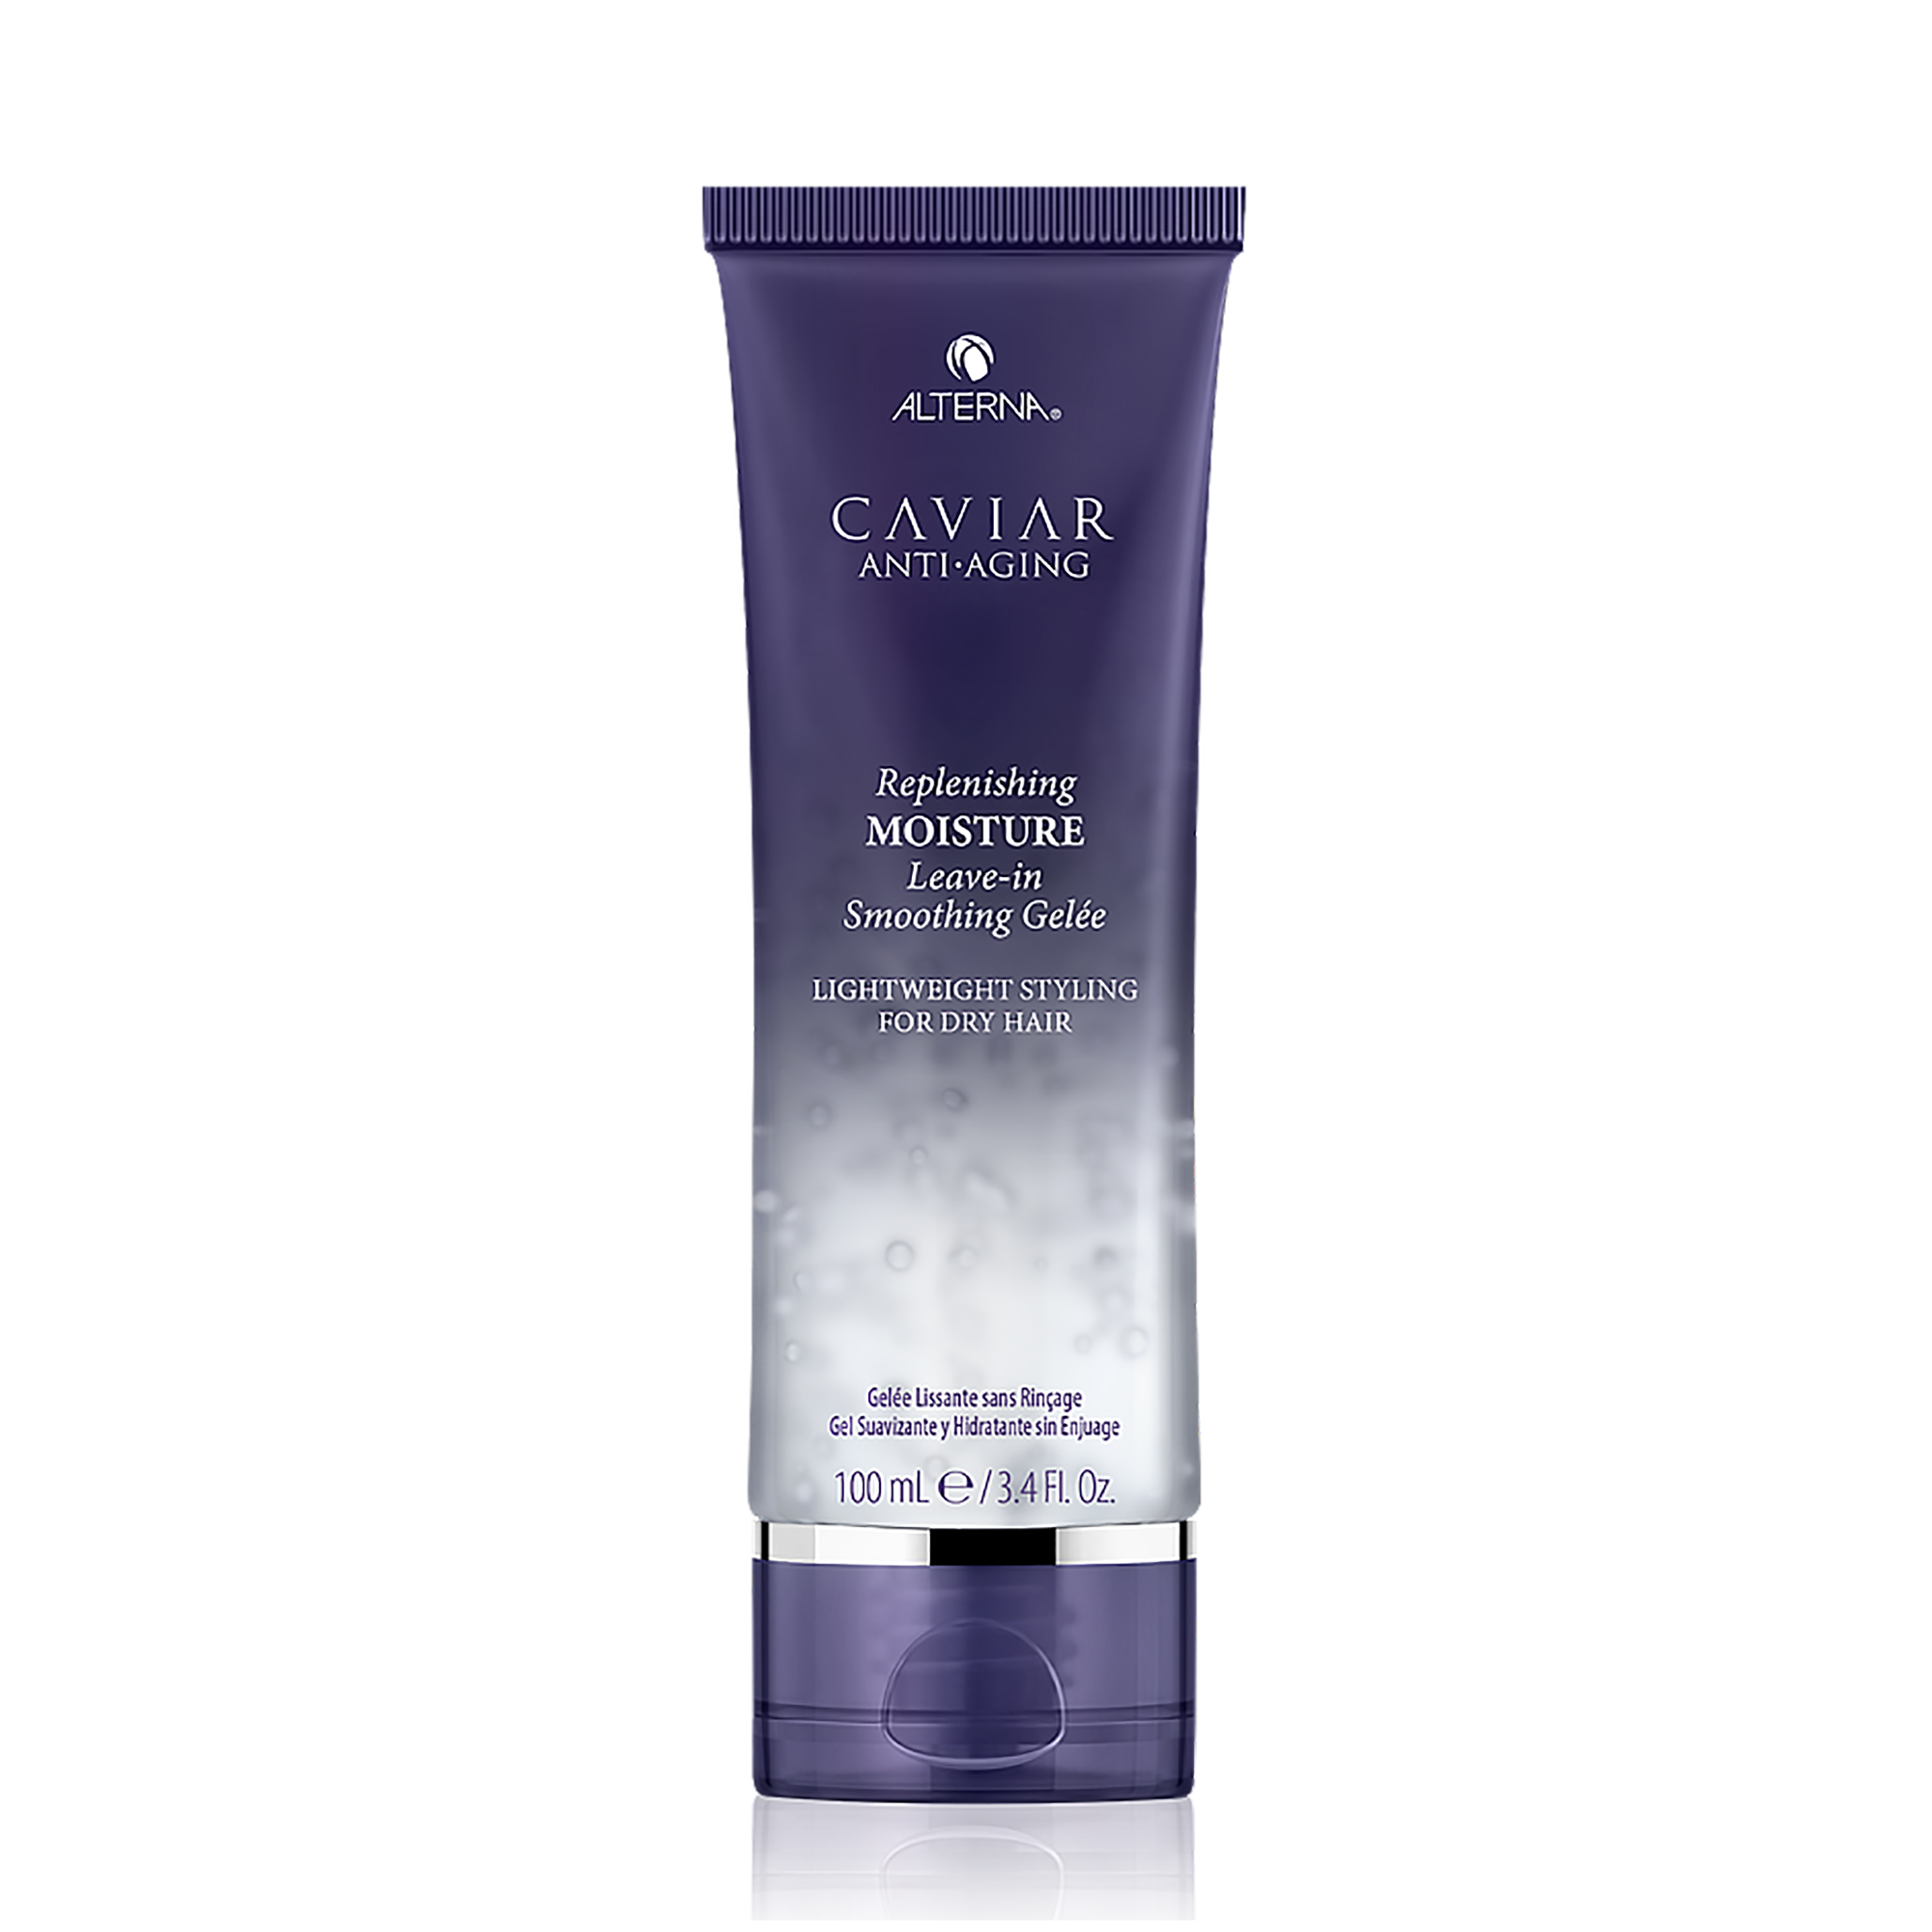 Alterna Caviar Anti-Aging Replenishing Moisture Leave-In Smoothing Gelee / 3.4OZ